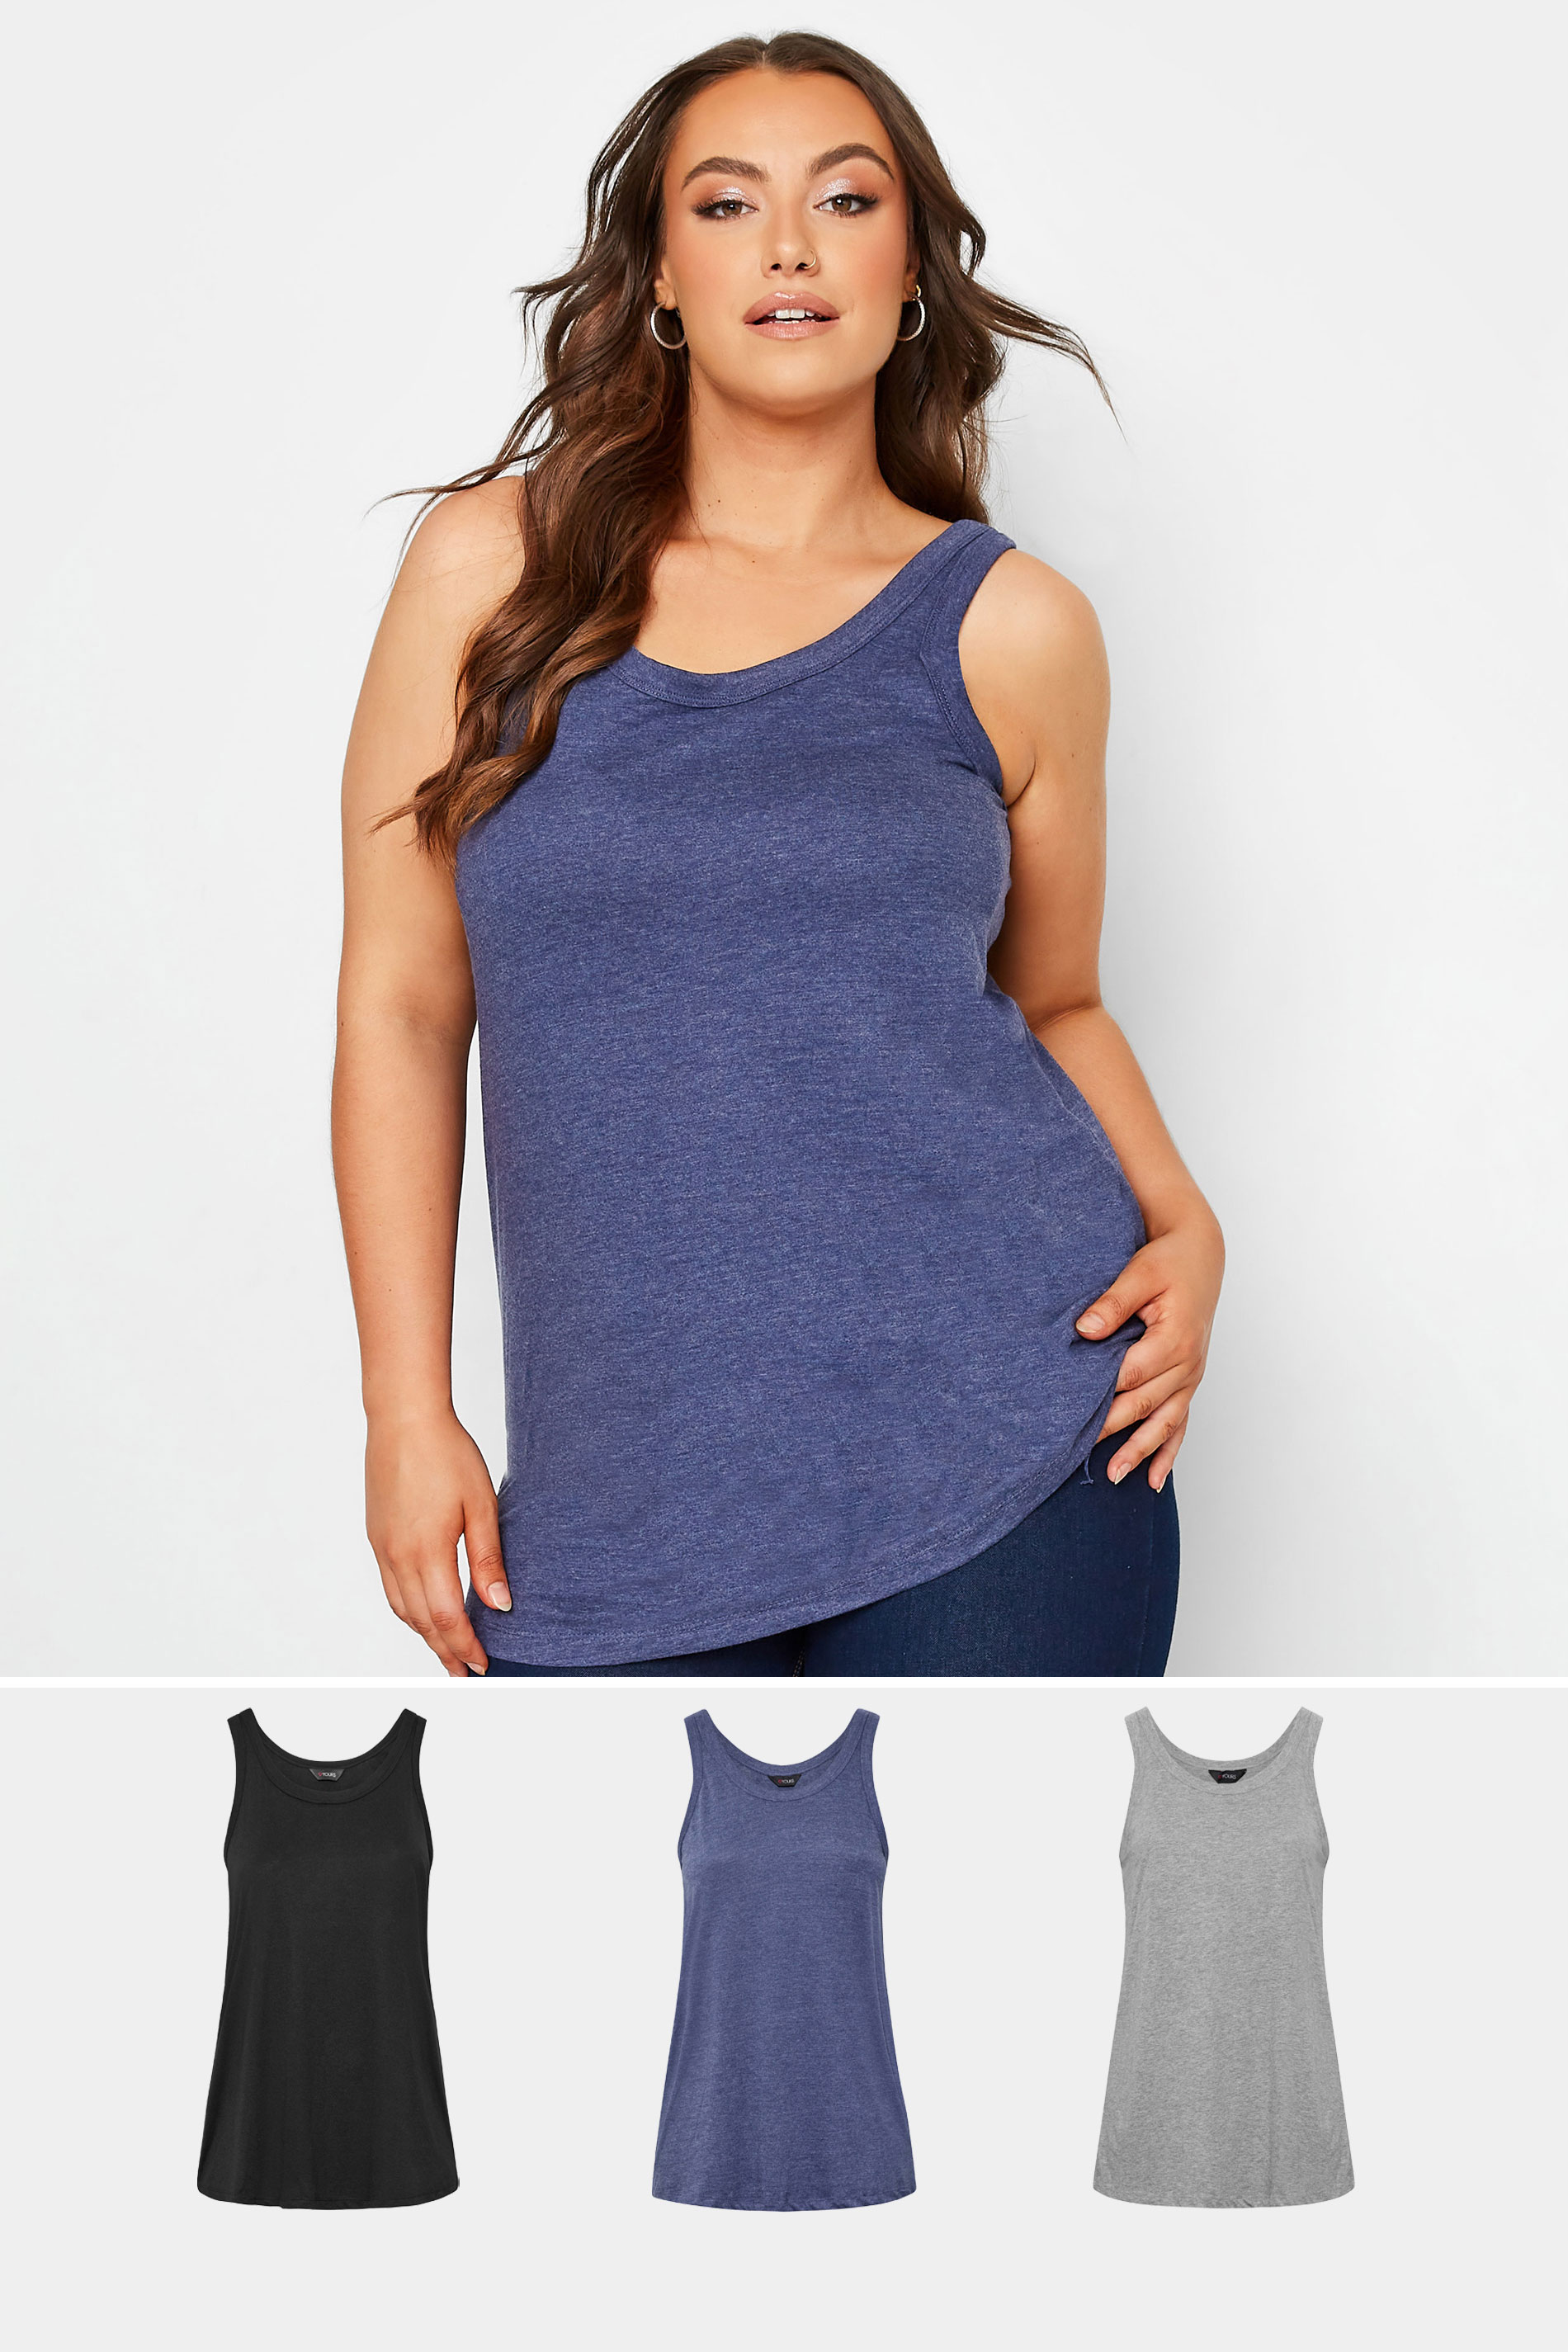  3 PACK Curve Black & Grey Vest Tops | Yours Clothing  1